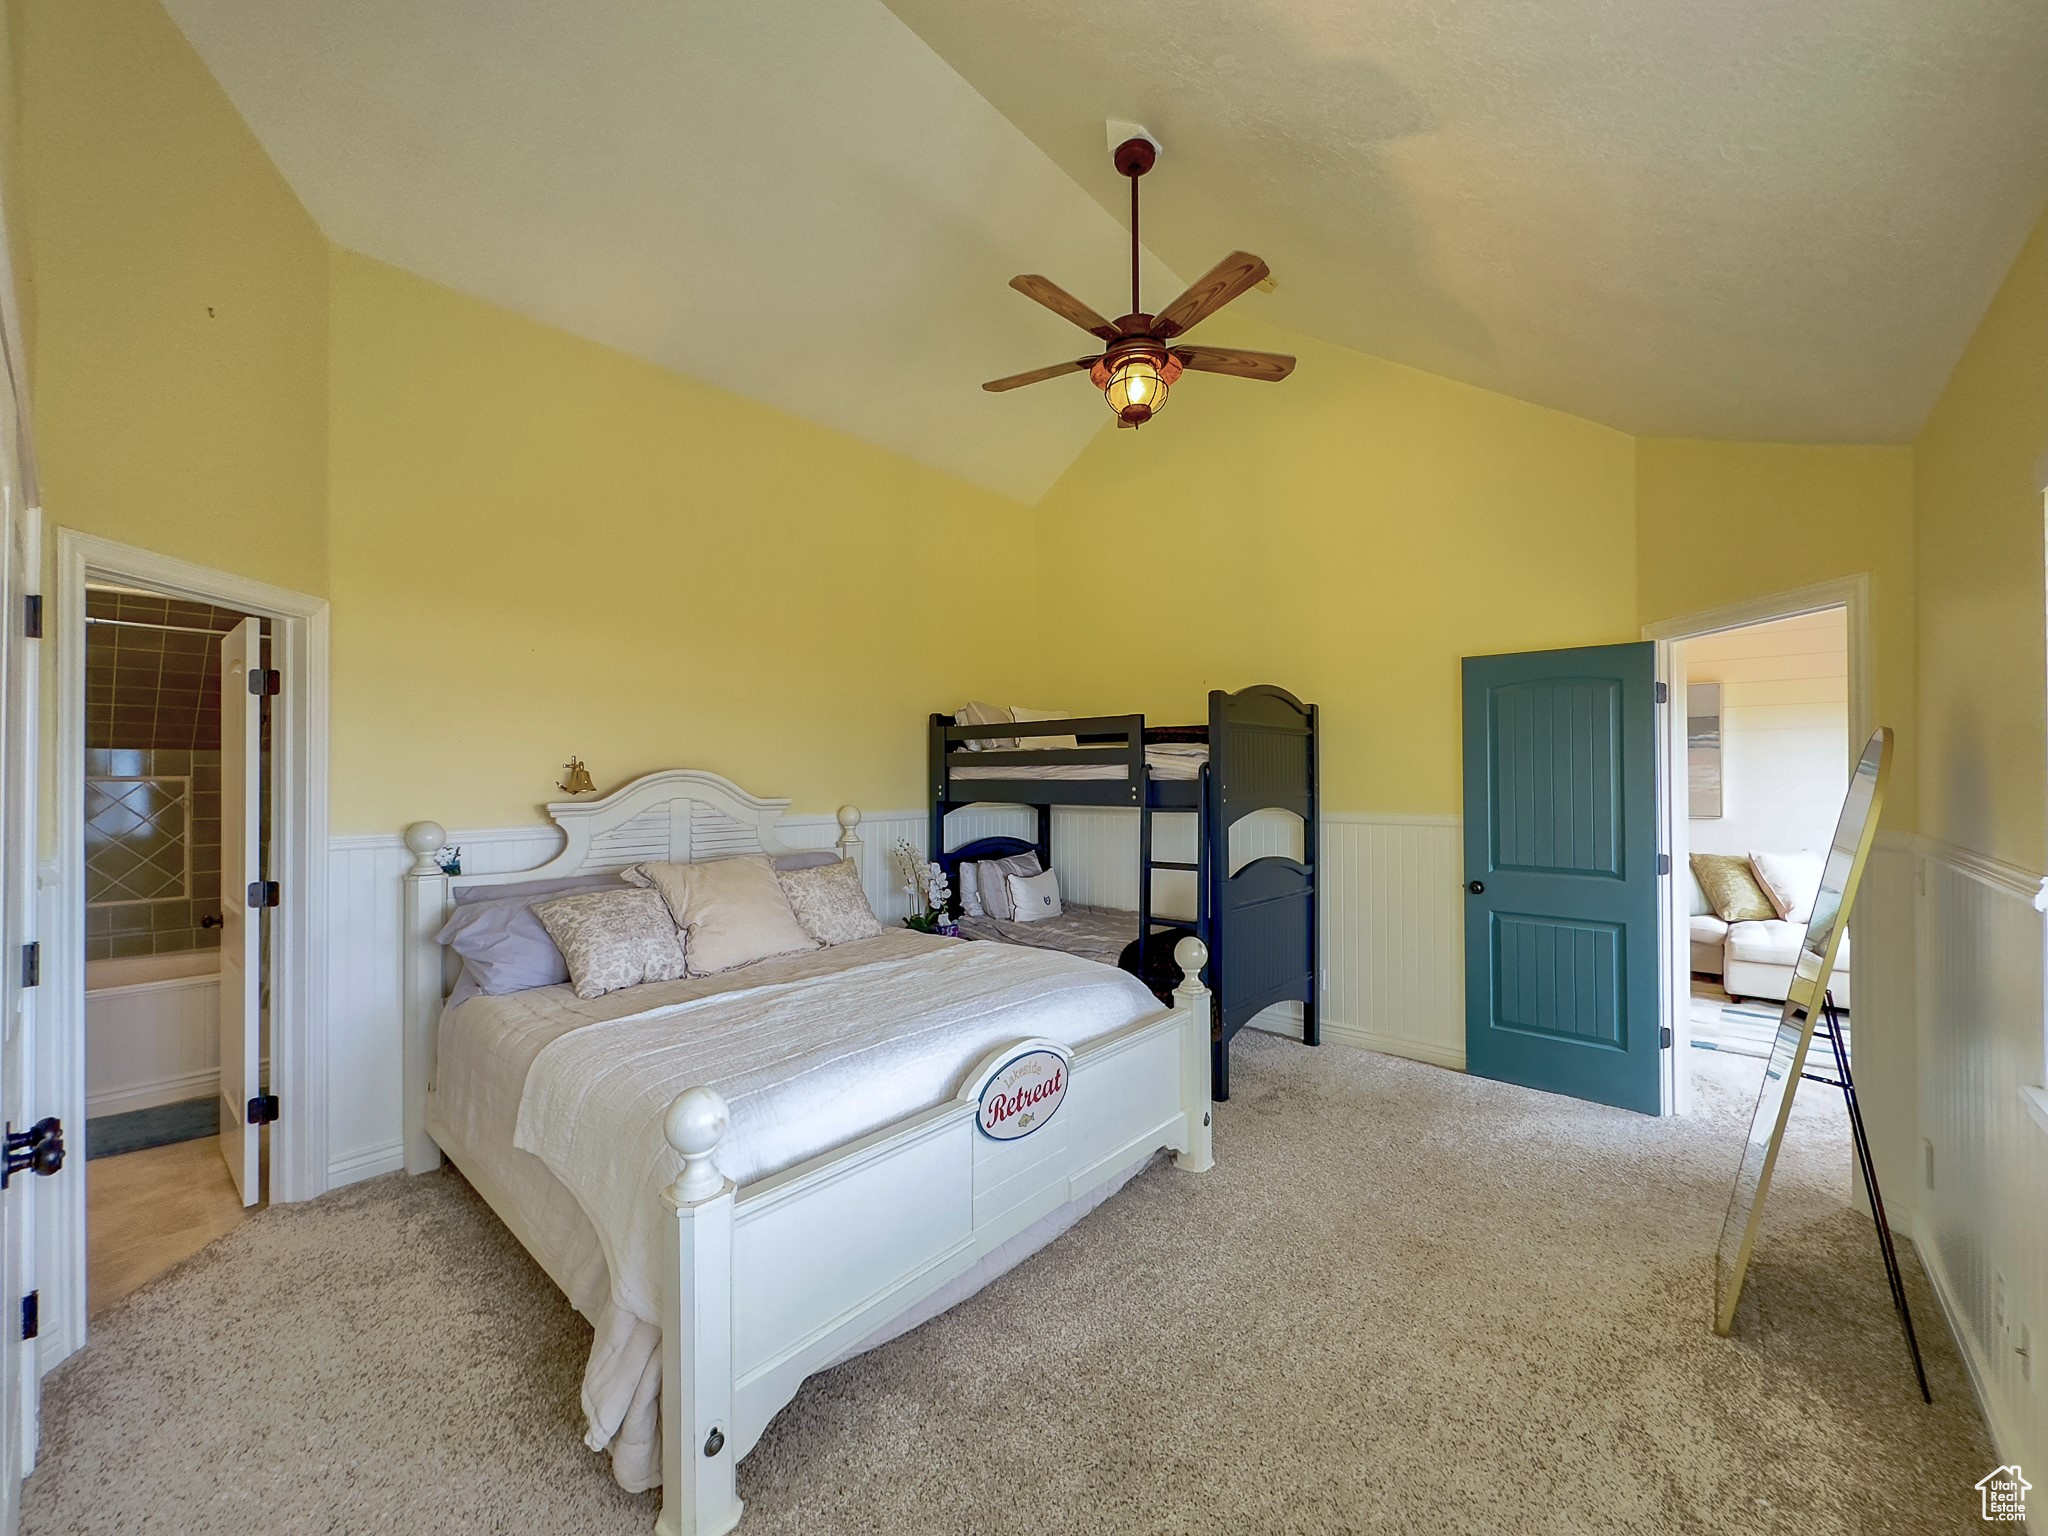 Carpeted bedroom featuring high vaulted ceiling and ceiling fan